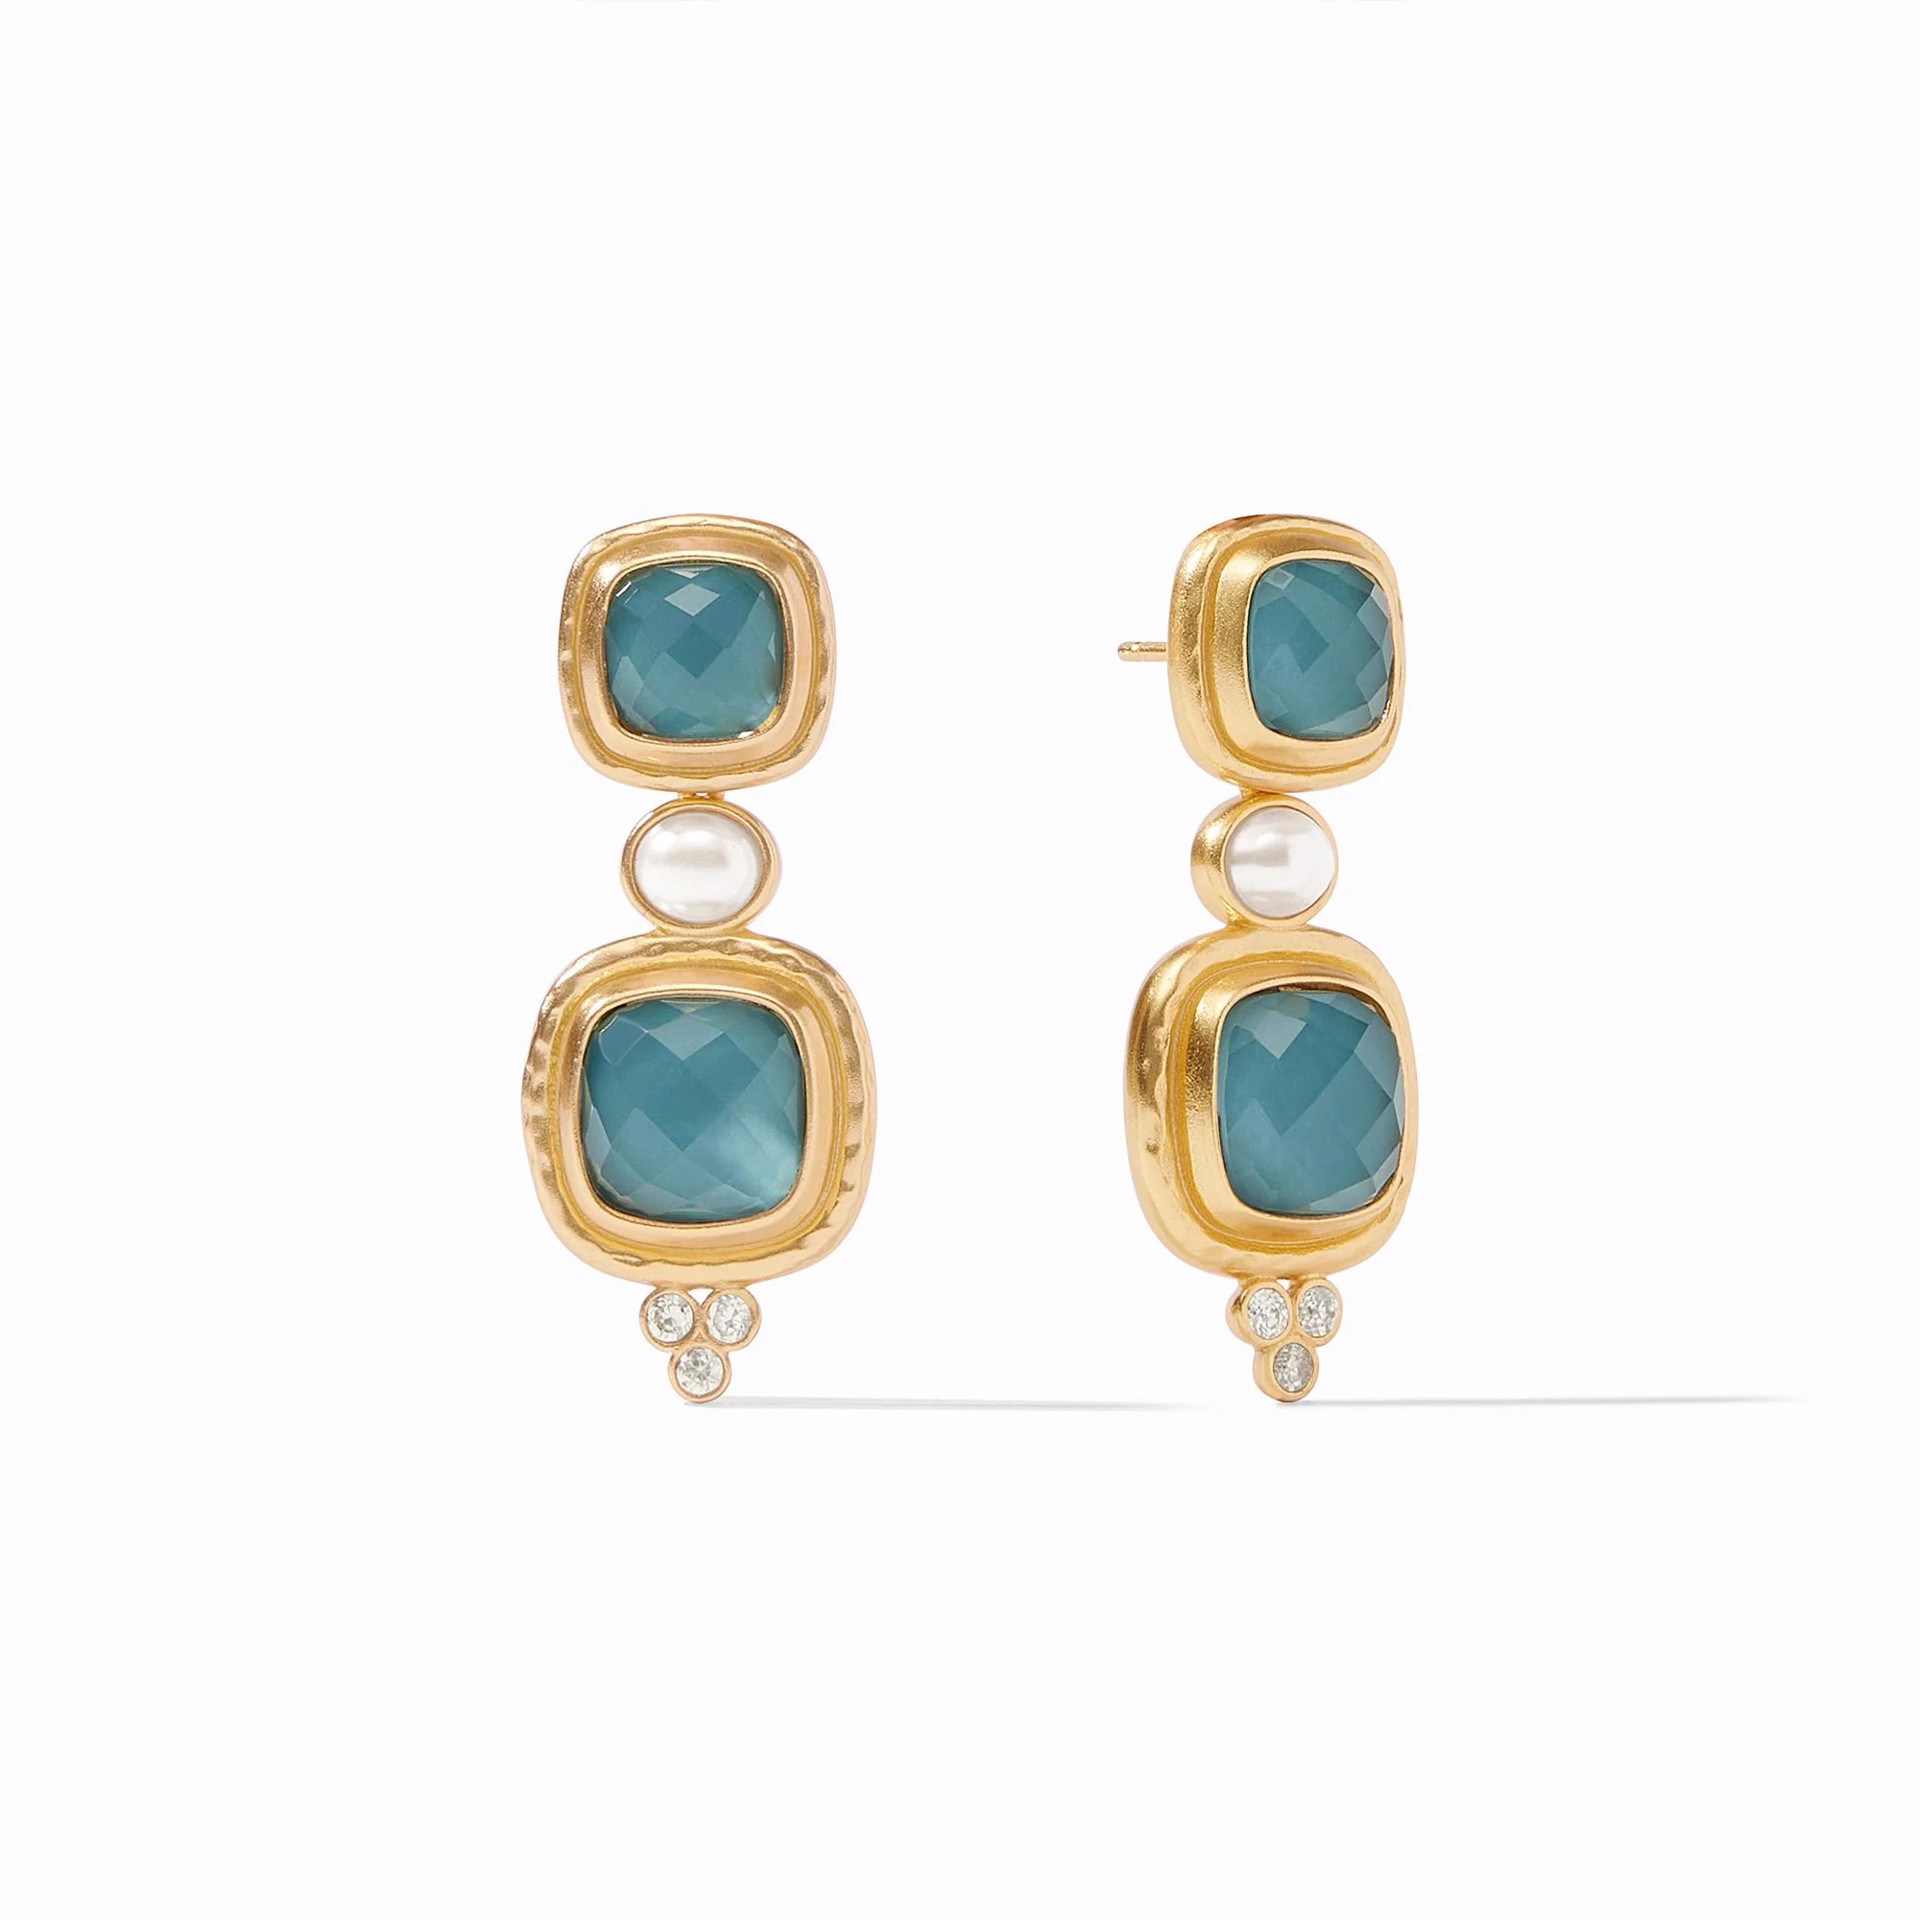 Tudor Statement Earring by Julie Vos